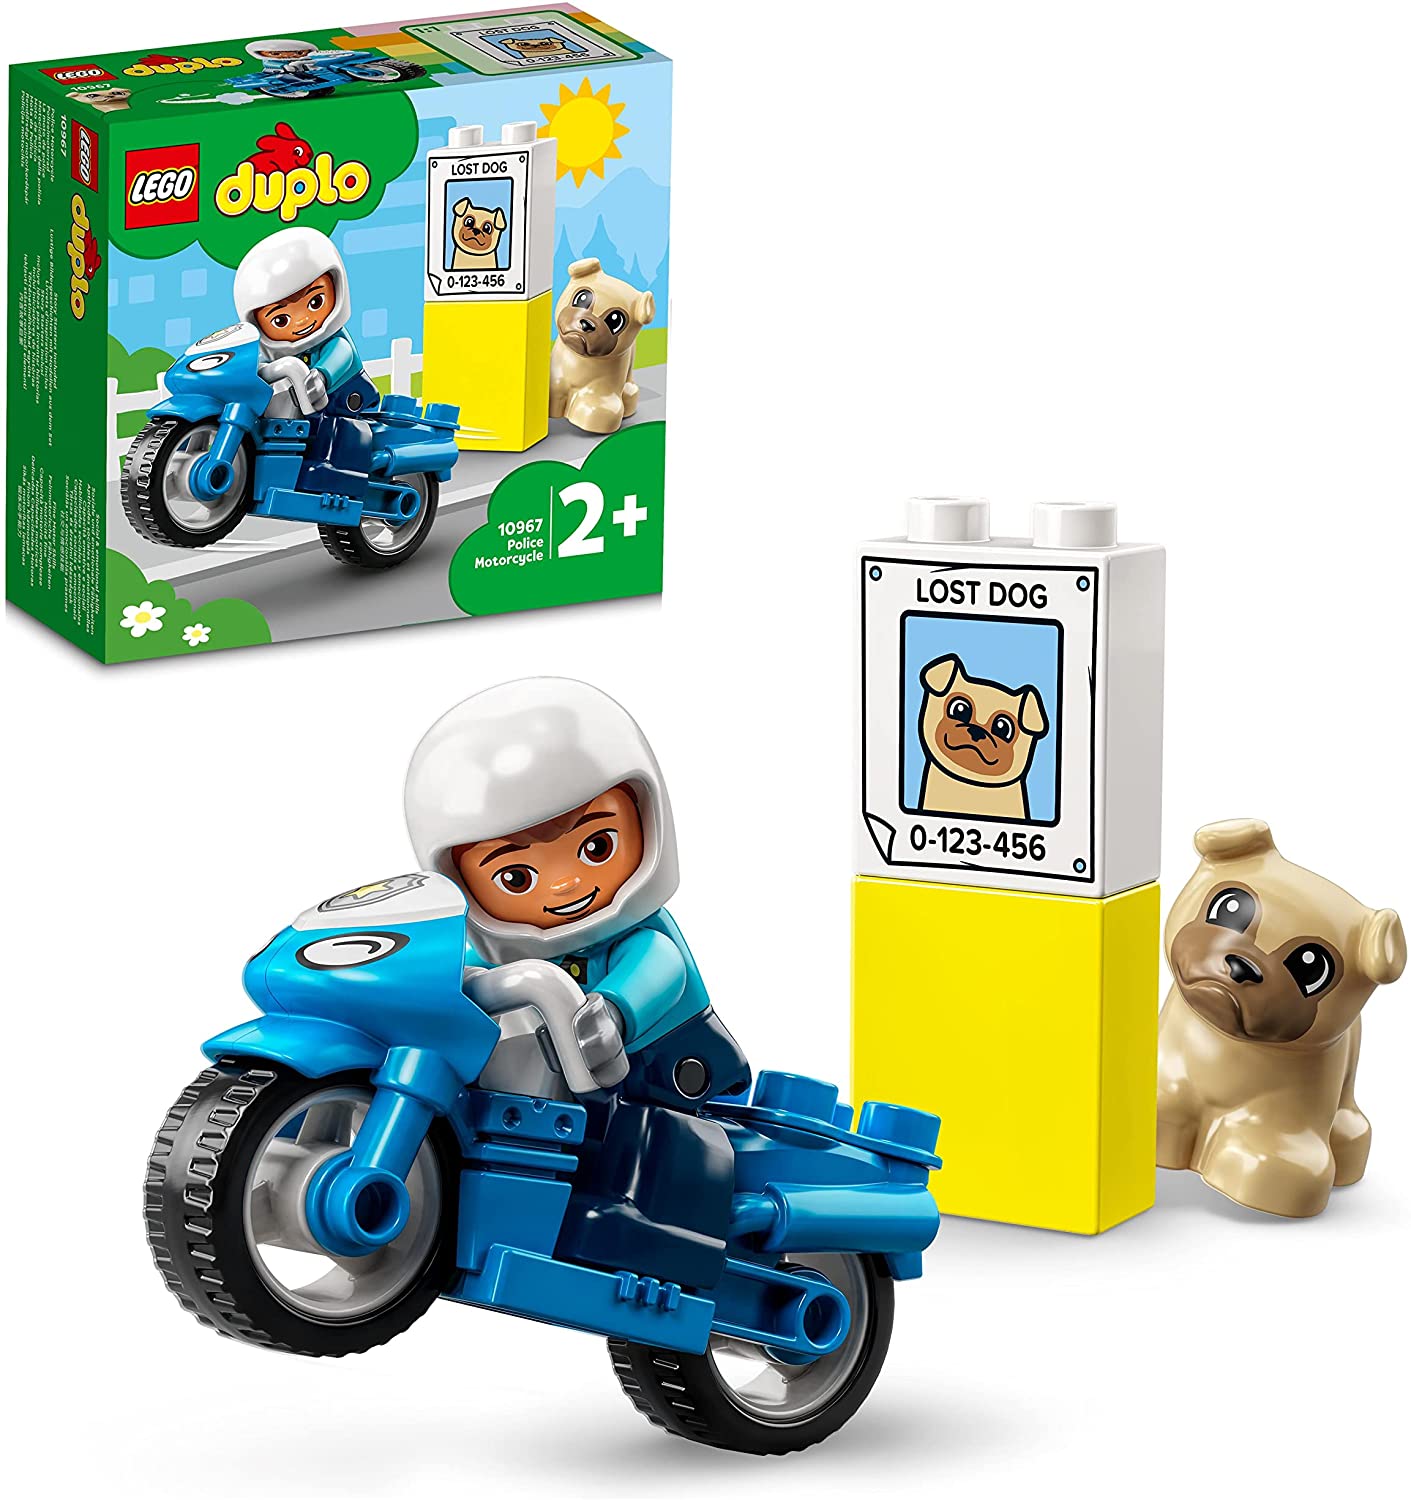 LEGO 10967 DUPLO Police Motorcycle, Police Toy for Toddlers from 2 Years, I